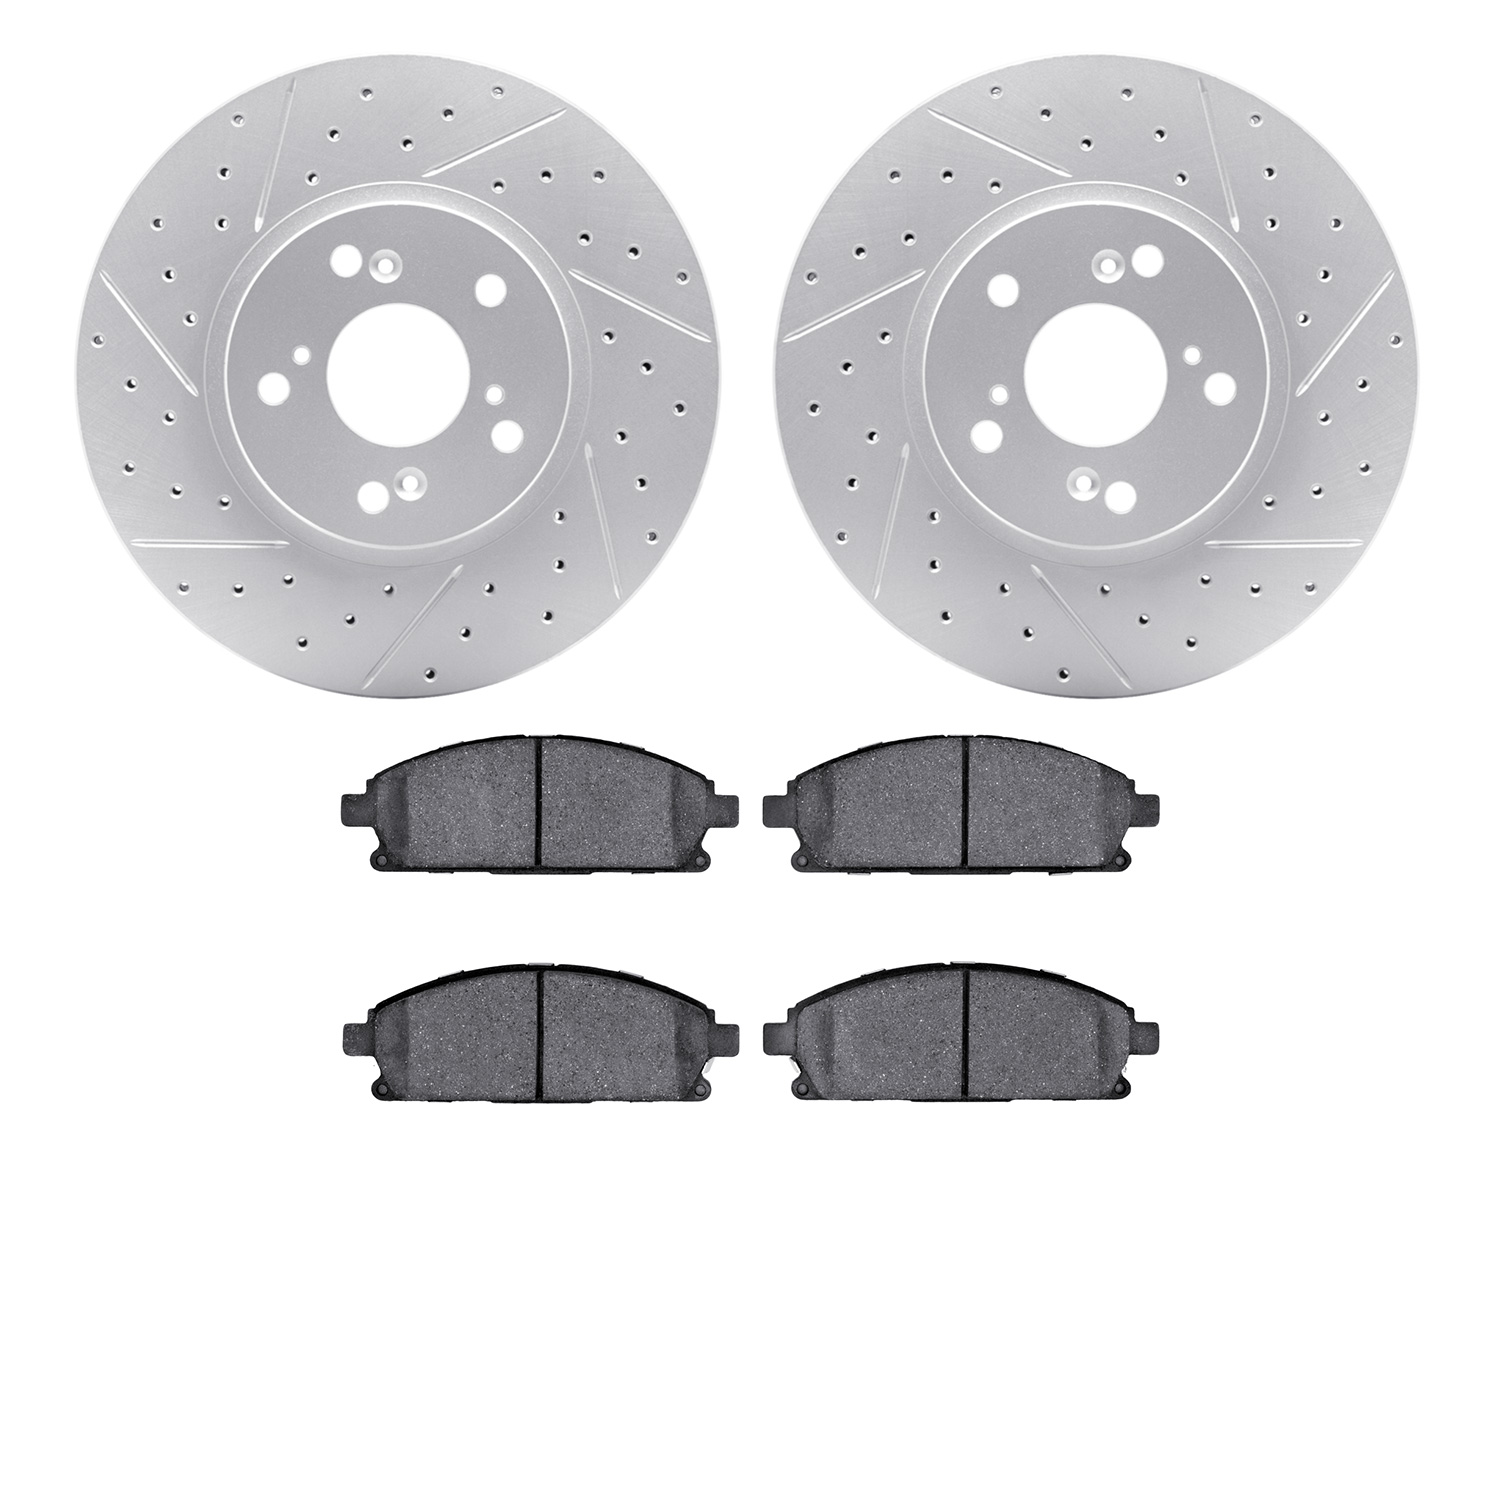 2502-59057 Geoperformance Drilled/Slotted Rotors w/5000 Advanced Brake Pads Kit, 2003-2006 Acura/Honda, Position: Front